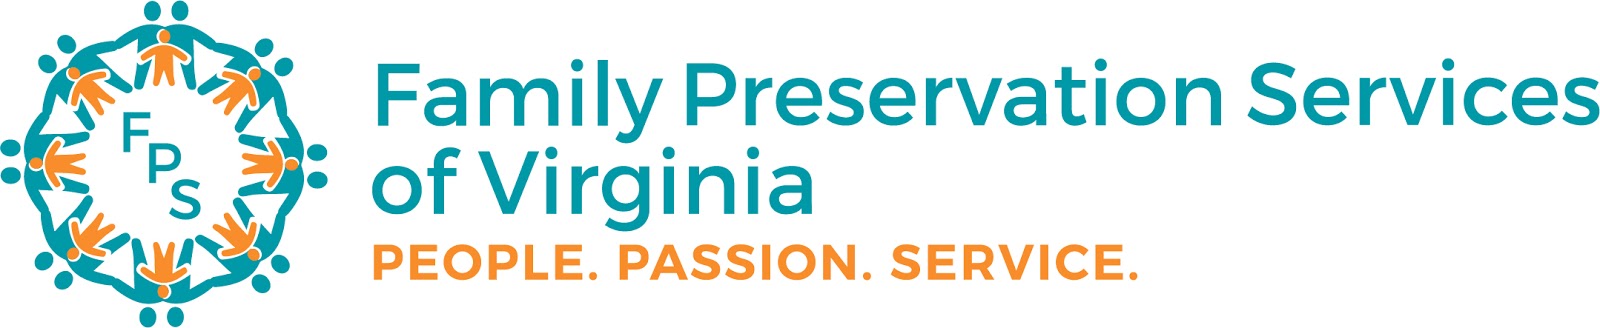 Family Preservation Services - Wise